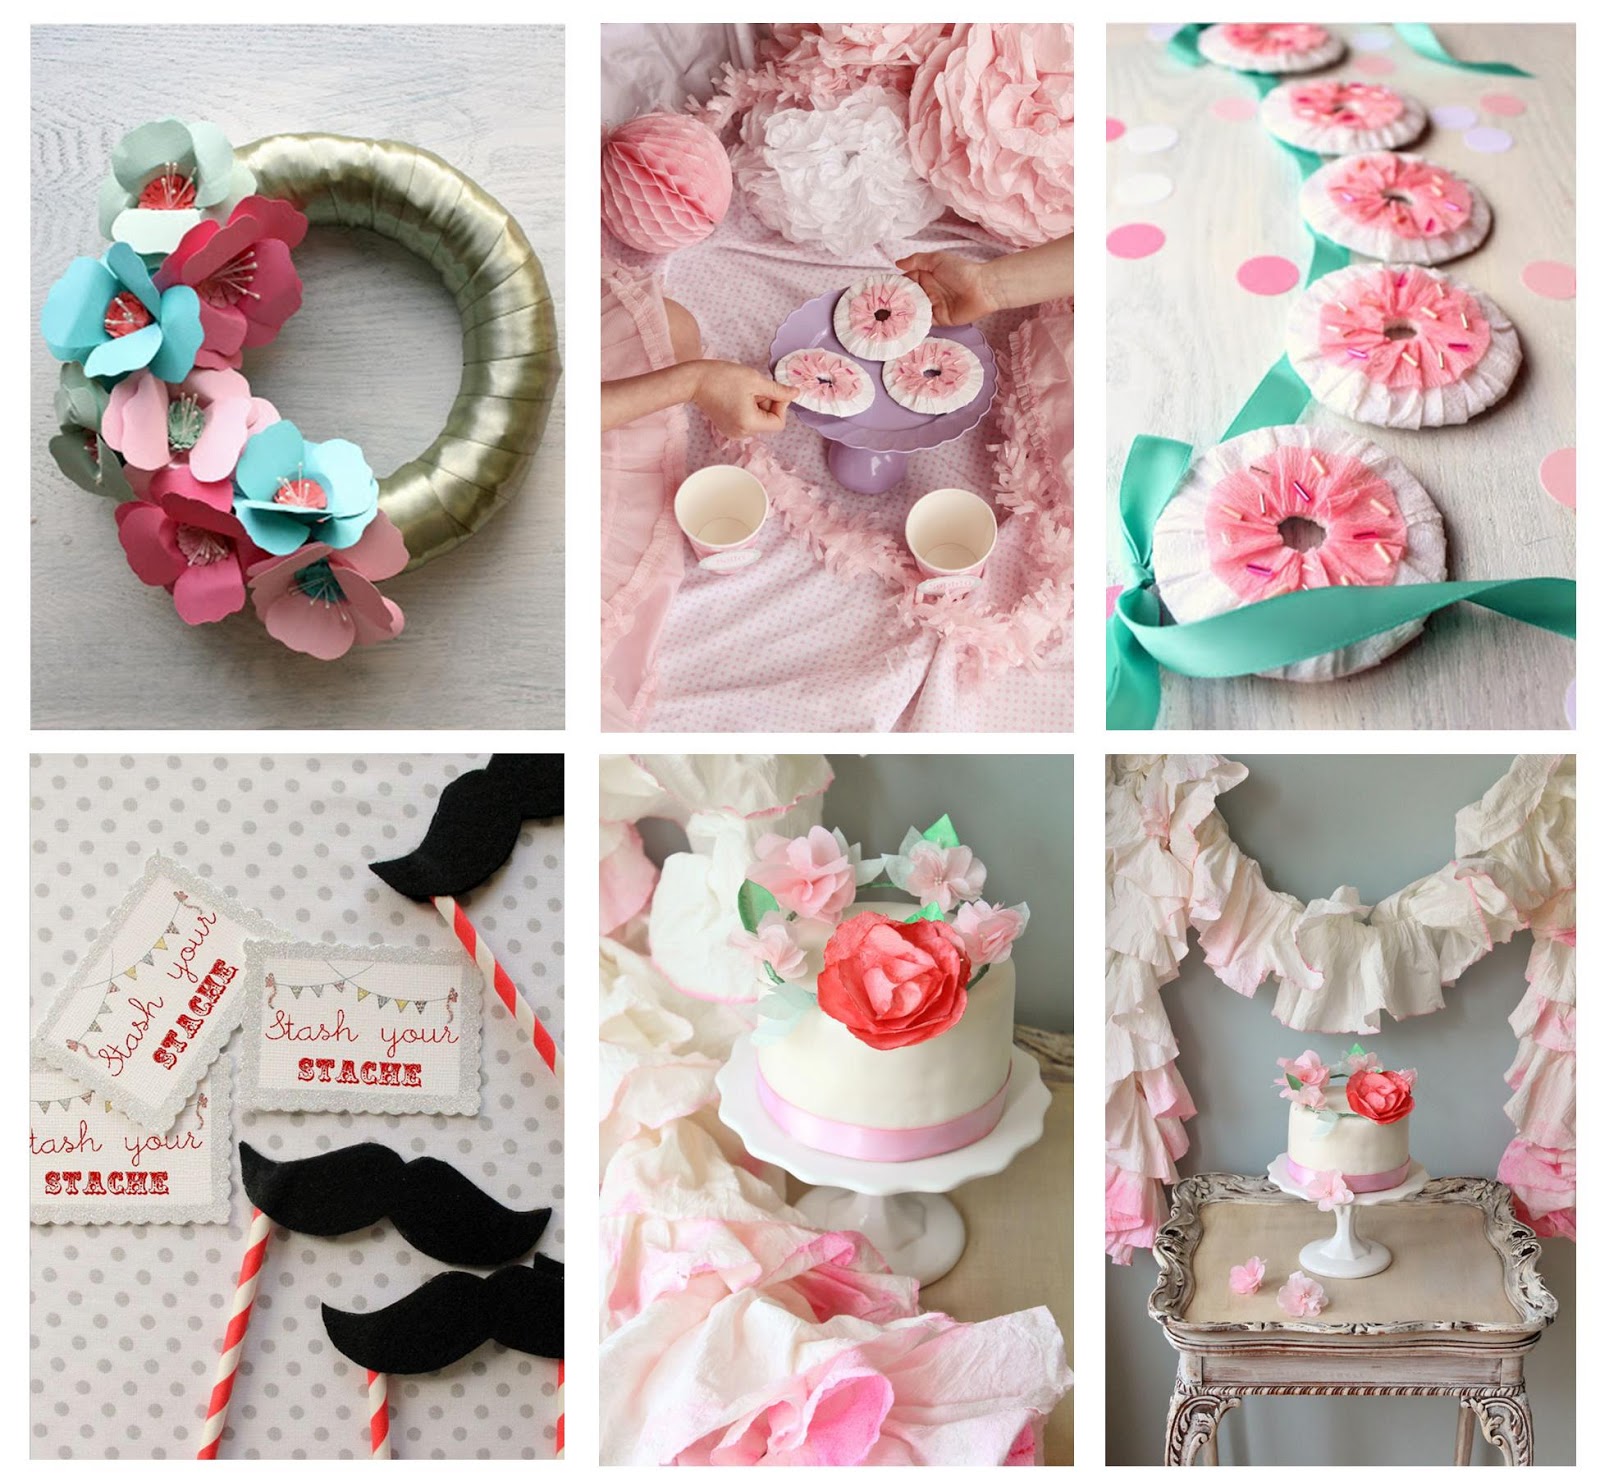 Icing Designs: DIY Projects